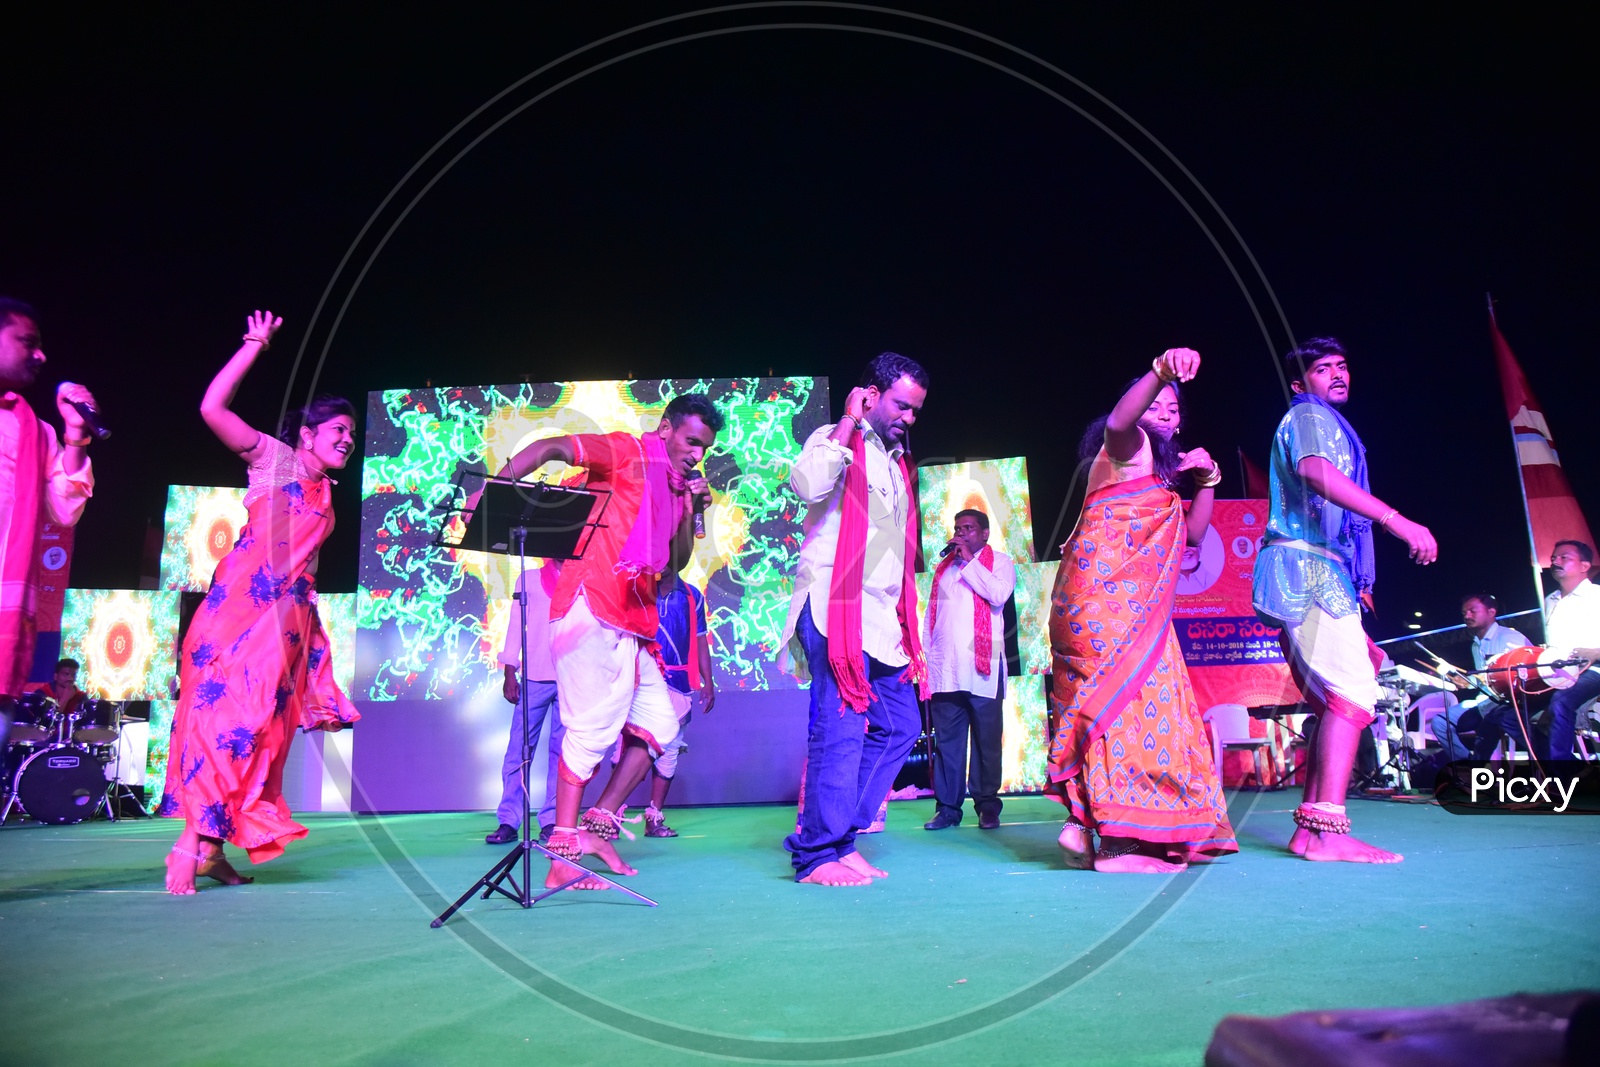 Traditional Folk Dancers Dancing On Stage